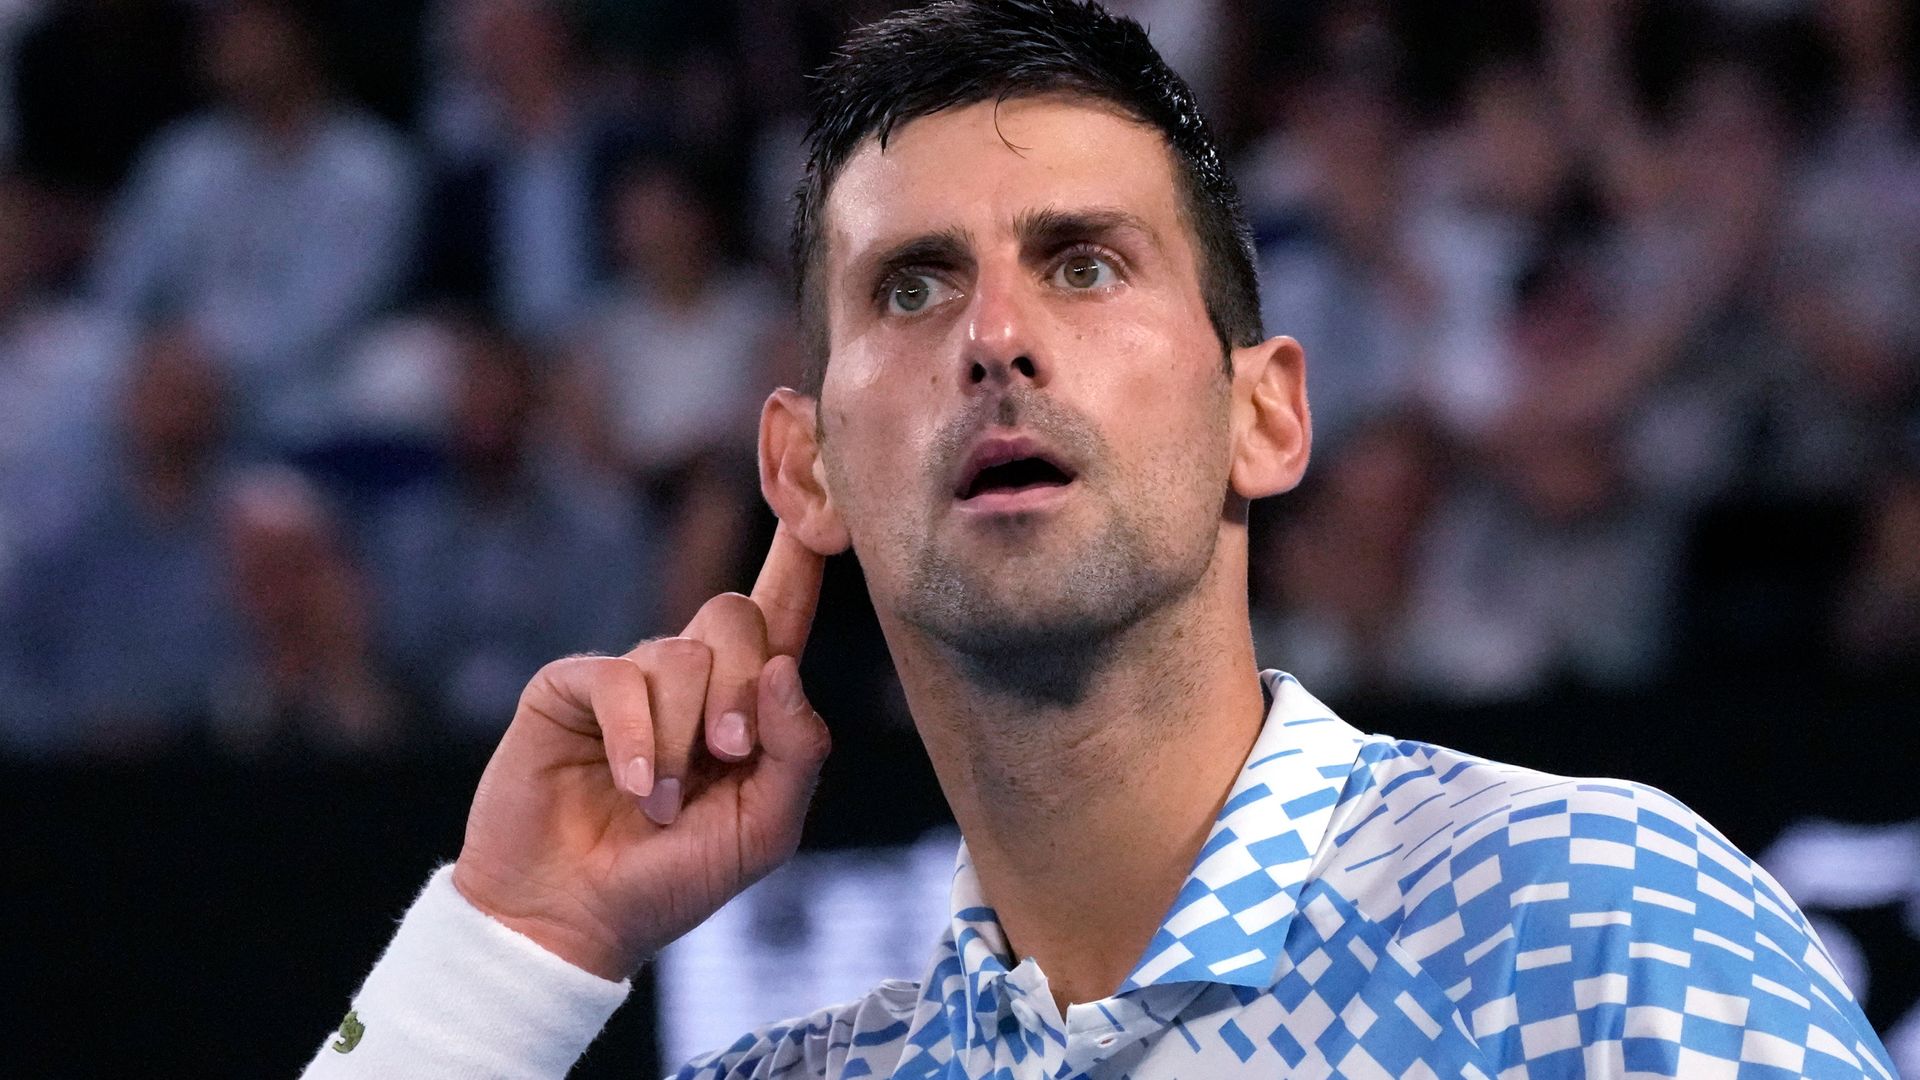 Djokovic played Aus Open with 3cm hamstring tear, says tournament director